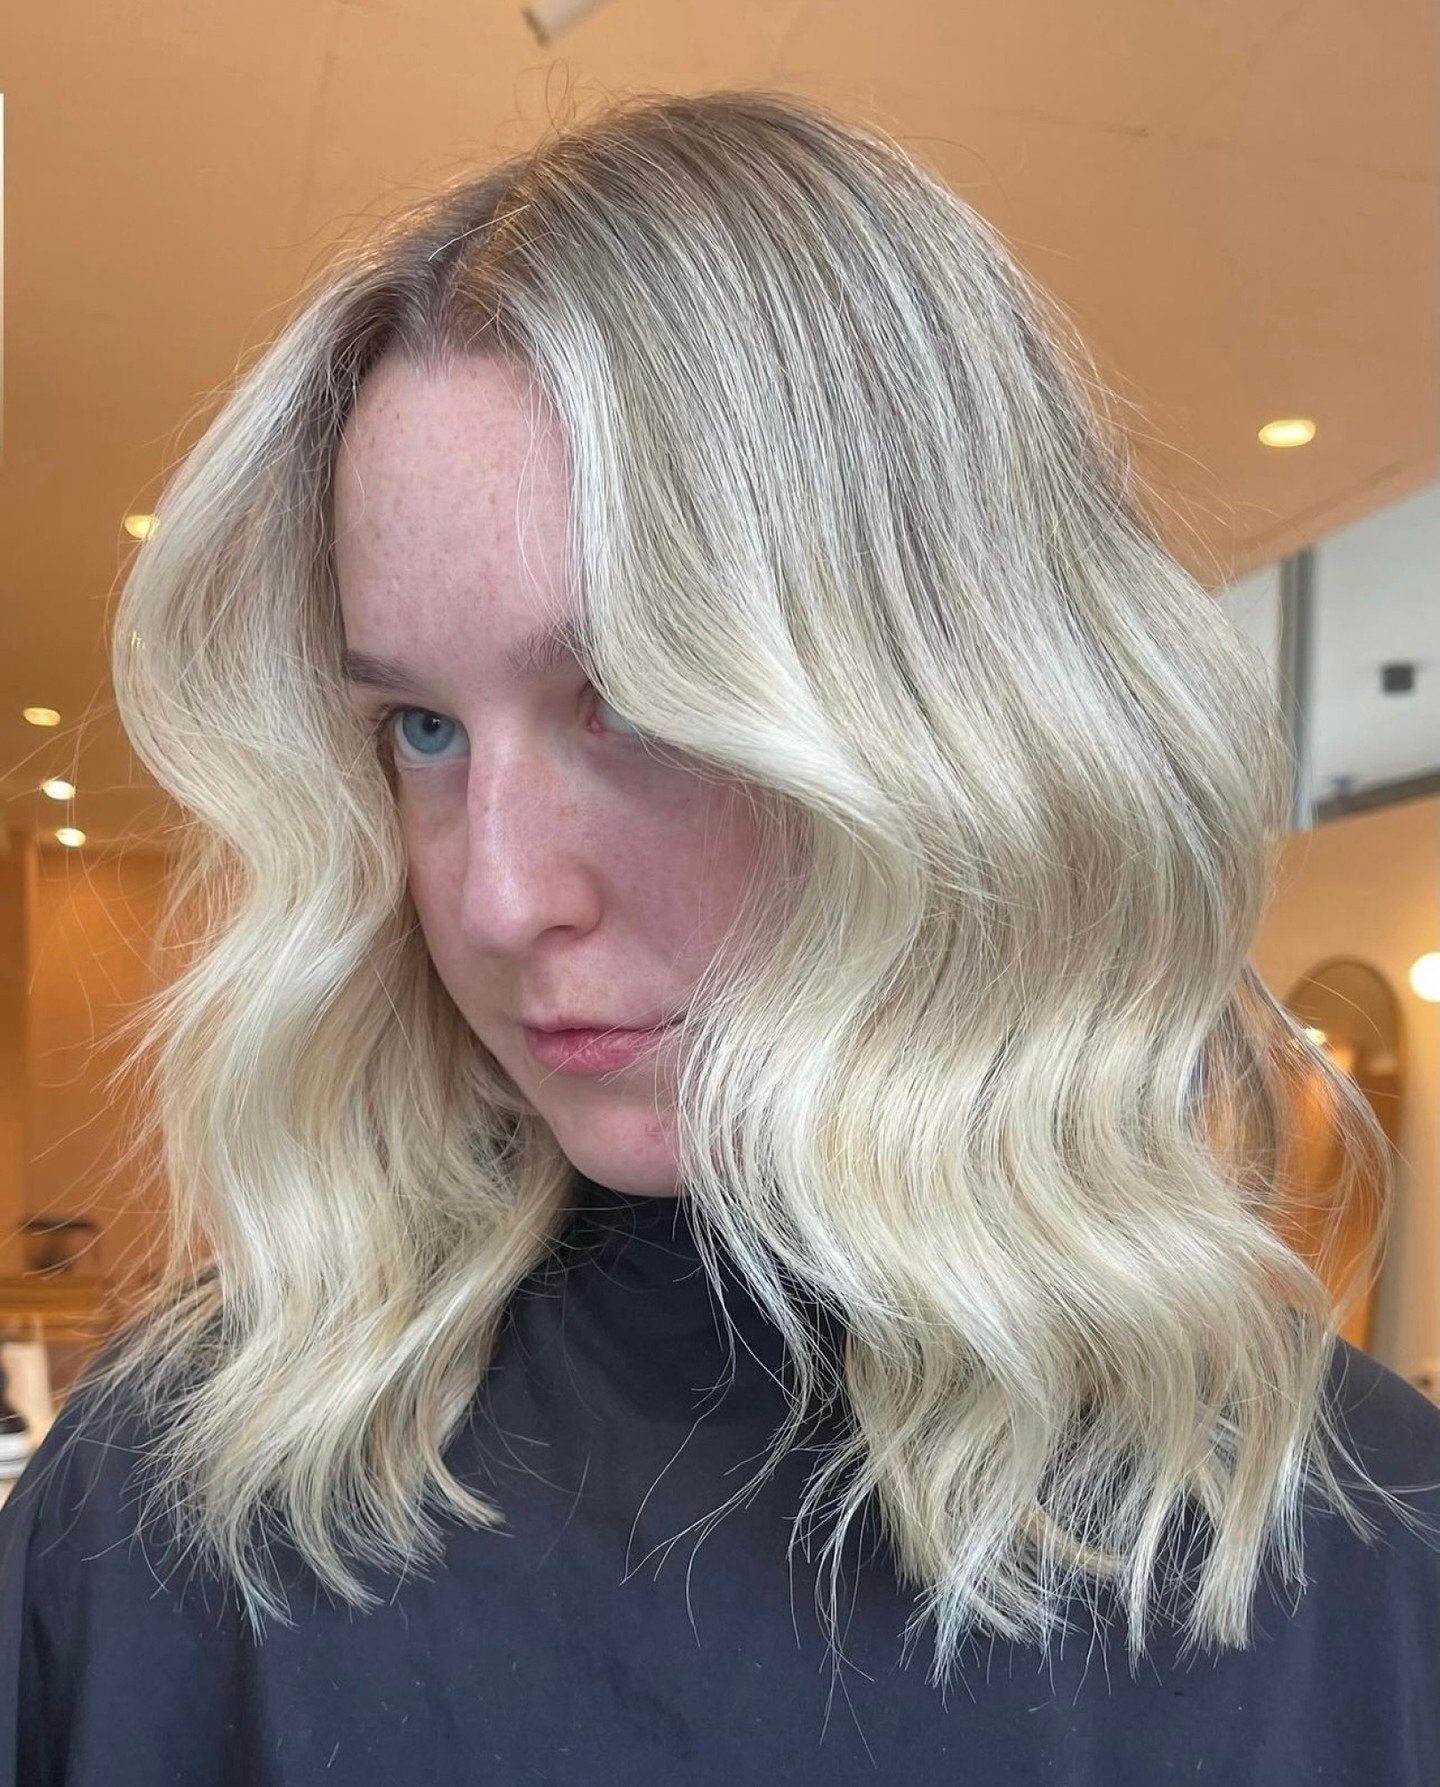 Shorter &amp; Blonder 〰️ coming right up! ✨ Check out this beautiful transformation by our Emerging Stylist @anna_blondee. Killinggggg it girl! 

BOOK A HAIR MODEL APPOINTMENT 〰️ blondee.com.au/book-online or join our Hair Model EOI list and let us c